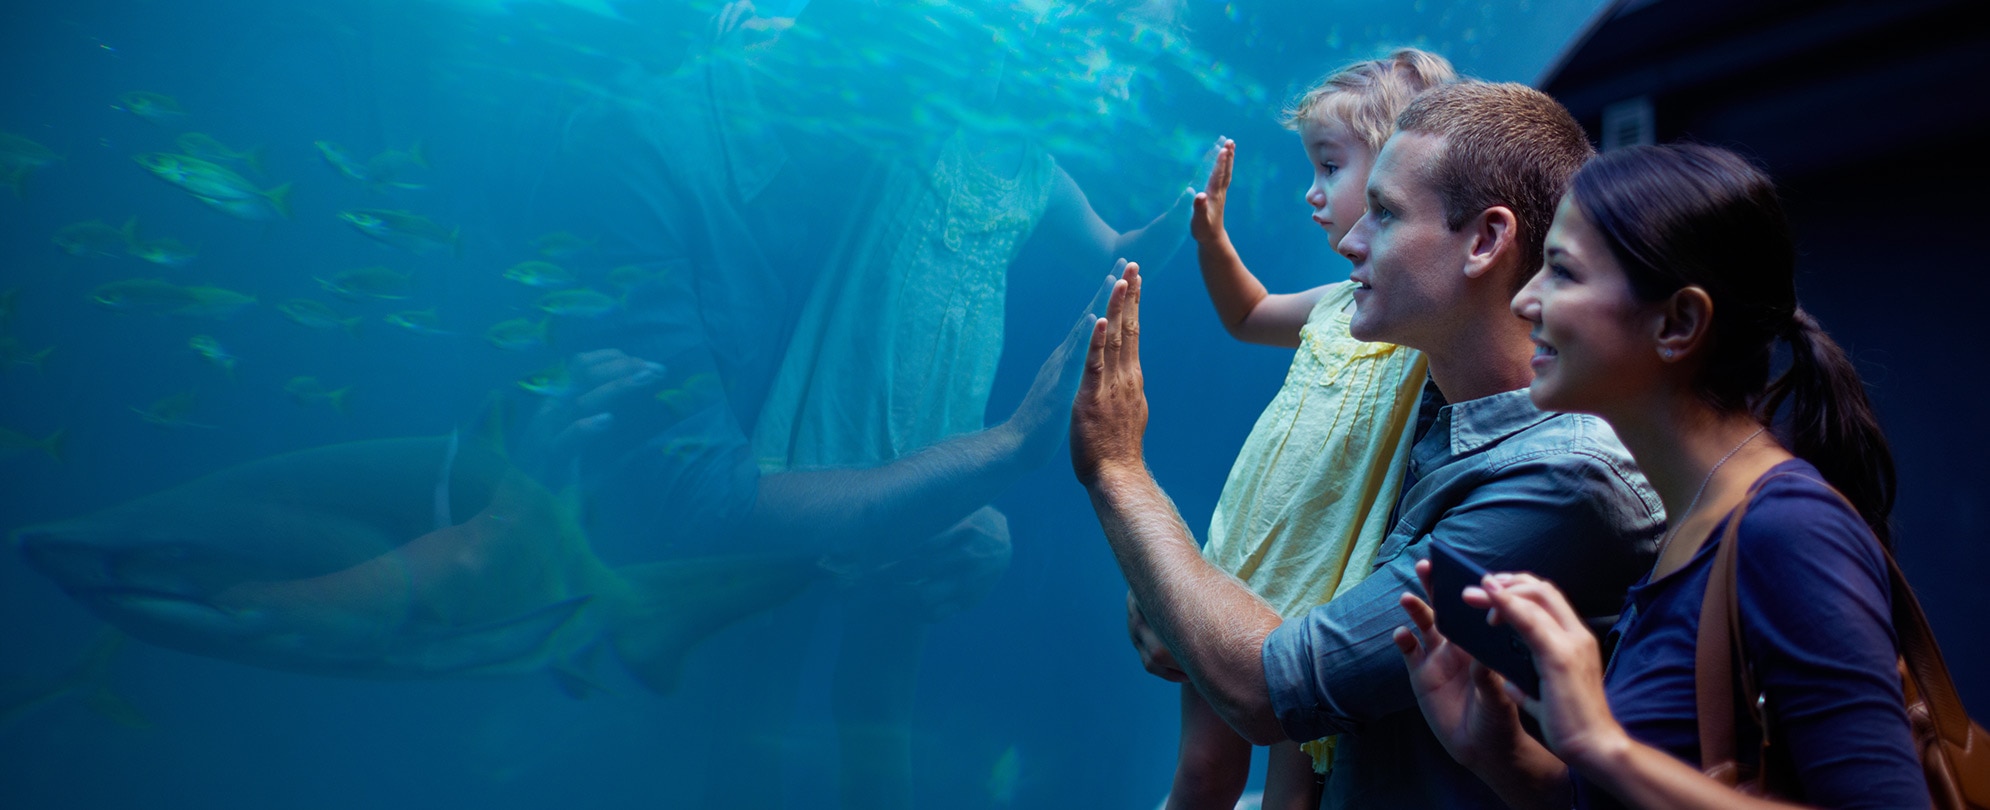 A family of three looks into a aquarium tank filled with fishes.